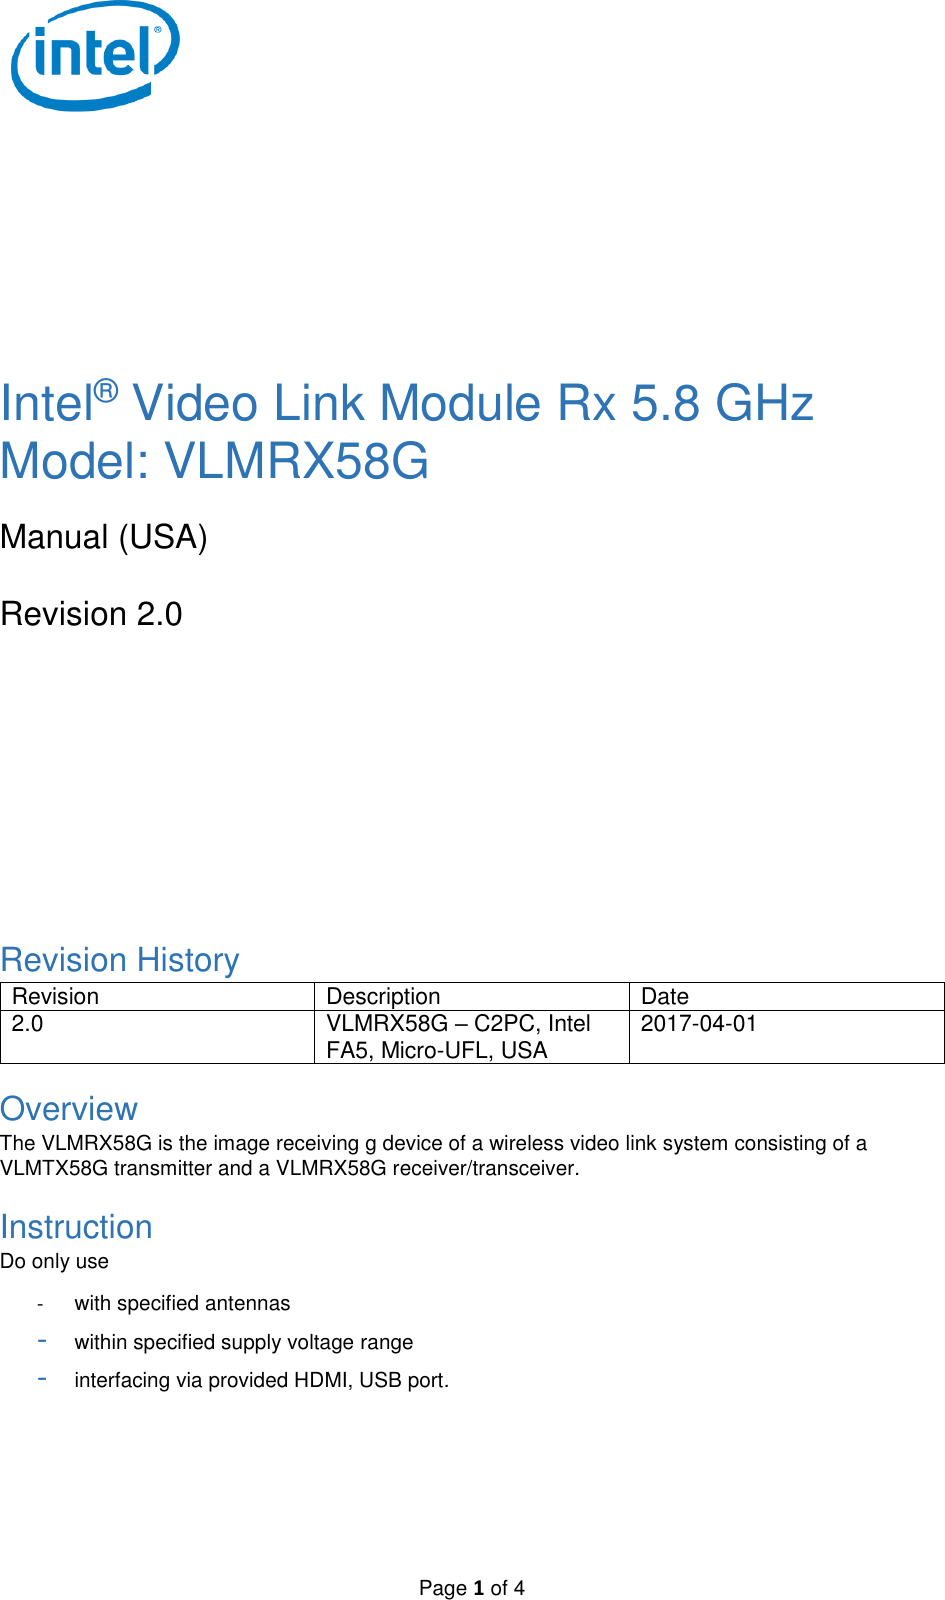   Page 1 of 4        Intel® Video Link Module Rx 5.8 GHz Model: VLMRX58G  Manual (USA)  Revision 2.0        Revision History Revision Description Date 2.0 VLMRX58G – C2PC, Intel FA5, Micro-UFL, USA 2017-04-01 Overview The VLMRX58G is the image receiving g device of a wireless video link system consisting of a VLMTX58G transmitter and a VLMRX58G receiver/transceiver. Instruction Do only use  -  with specified antennas - within specified supply voltage range - interfacing via provided HDMI, USB port.  